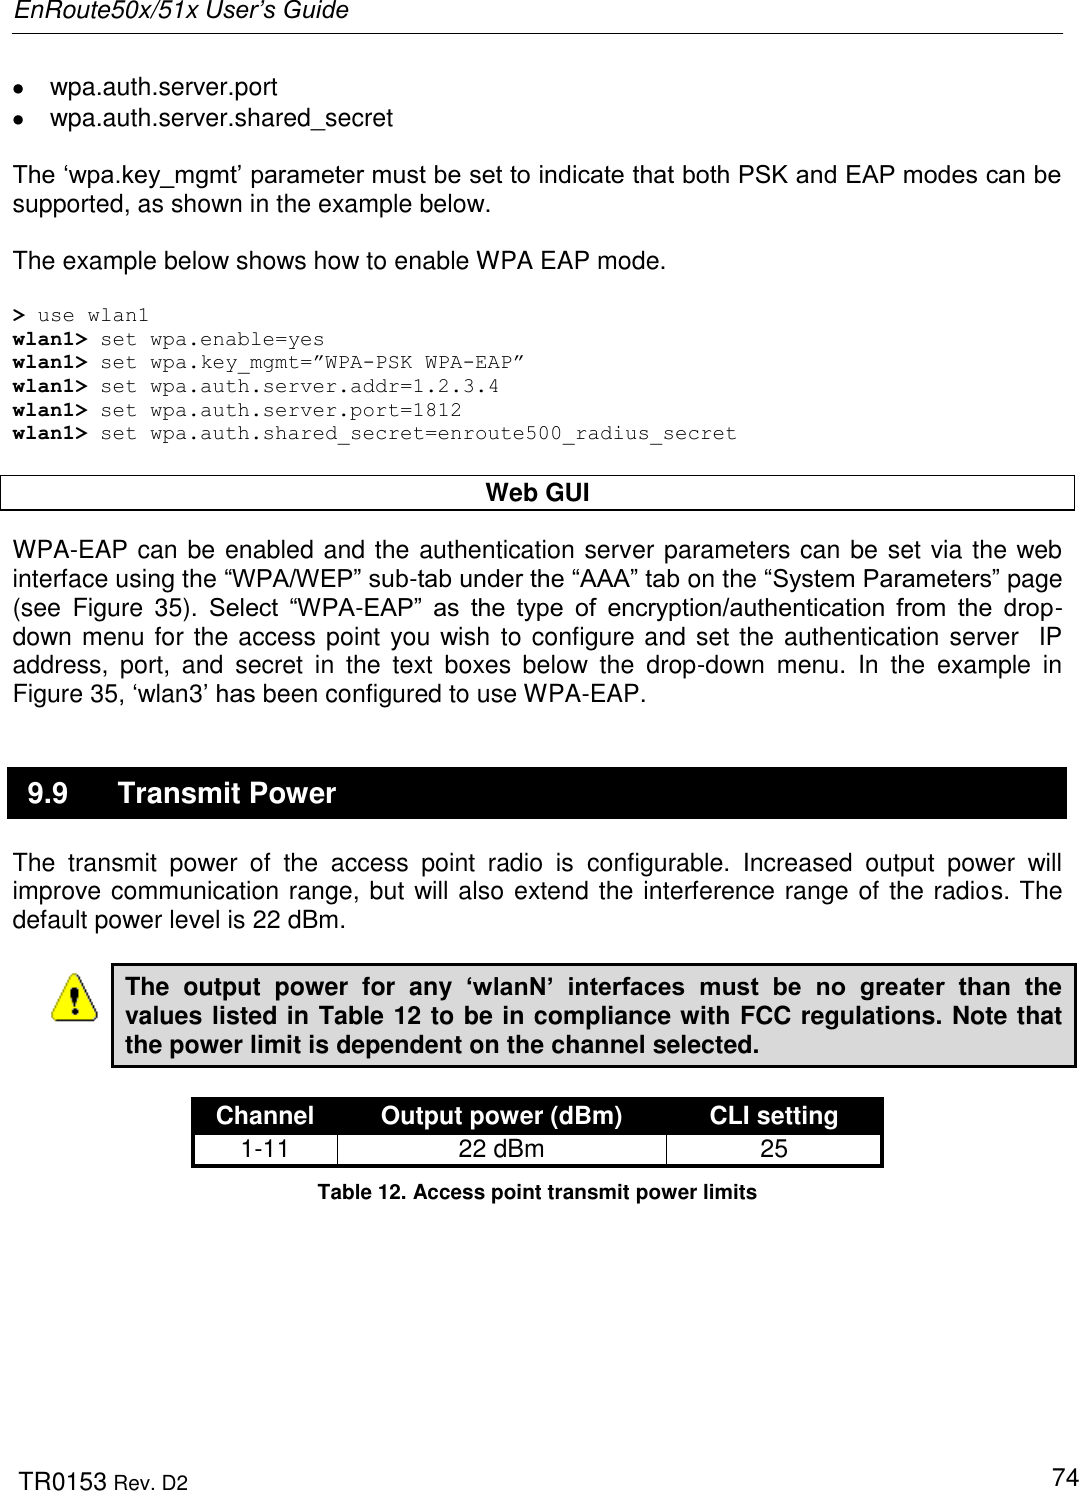 EnRoute50x/51x User’s Guide  TR0153 Rev. D2   74   wpa.auth.server.port    wpa.auth.server.shared_secret  The „wpa.key_mgmt‟ parameter must be set to indicate that both PSK and EAP modes can be supported, as shown in the example below.  The example below shows how to enable WPA EAP mode.   &gt; use wlan1 wlan1&gt; set wpa.enable=yes wlan1&gt; set wpa.key_mgmt=”WPA-PSK WPA-EAP” wlan1&gt; set wpa.auth.server.addr=1.2.3.4 wlan1&gt; set wpa.auth.server.port=1812 wlan1&gt; set wpa.auth.shared_secret=enroute500_radius_secret  Web GUI WPA-EAP can be enabled and the authentication server parameters can be set via the web interface using the “WPA/WEP” sub-tab under the “AAA” tab on the “System Parameters” page (see  Figure  35).  Select  “WPA-EAP”  as  the  type  of  encryption/authentication  from  the  drop-down menu for the access point you wish to configure and set the authentication server  IP address,  port,  and  secret  in  the  text  boxes  below  the  drop-down  menu.  In  the  example  in Figure 35, „wlan3‟ has been configured to use WPA-EAP. 9.9  Transmit Power The  transmit  power  of  the  access  point  radio  is  configurable.  Increased  output  power  will improve communication range, but will also extend the interference range of the radios. The default power level is 22 dBm.  The  output  power  for  any  ‘wlanN’  interfaces  must  be  no  greater  than  the values listed in Table 12 to be in compliance with FCC regulations. Note that the power limit is dependent on the channel selected.  Channel Output power (dBm) CLI setting 1-11 22 dBm 25 Table 12. Access point transmit power limits  